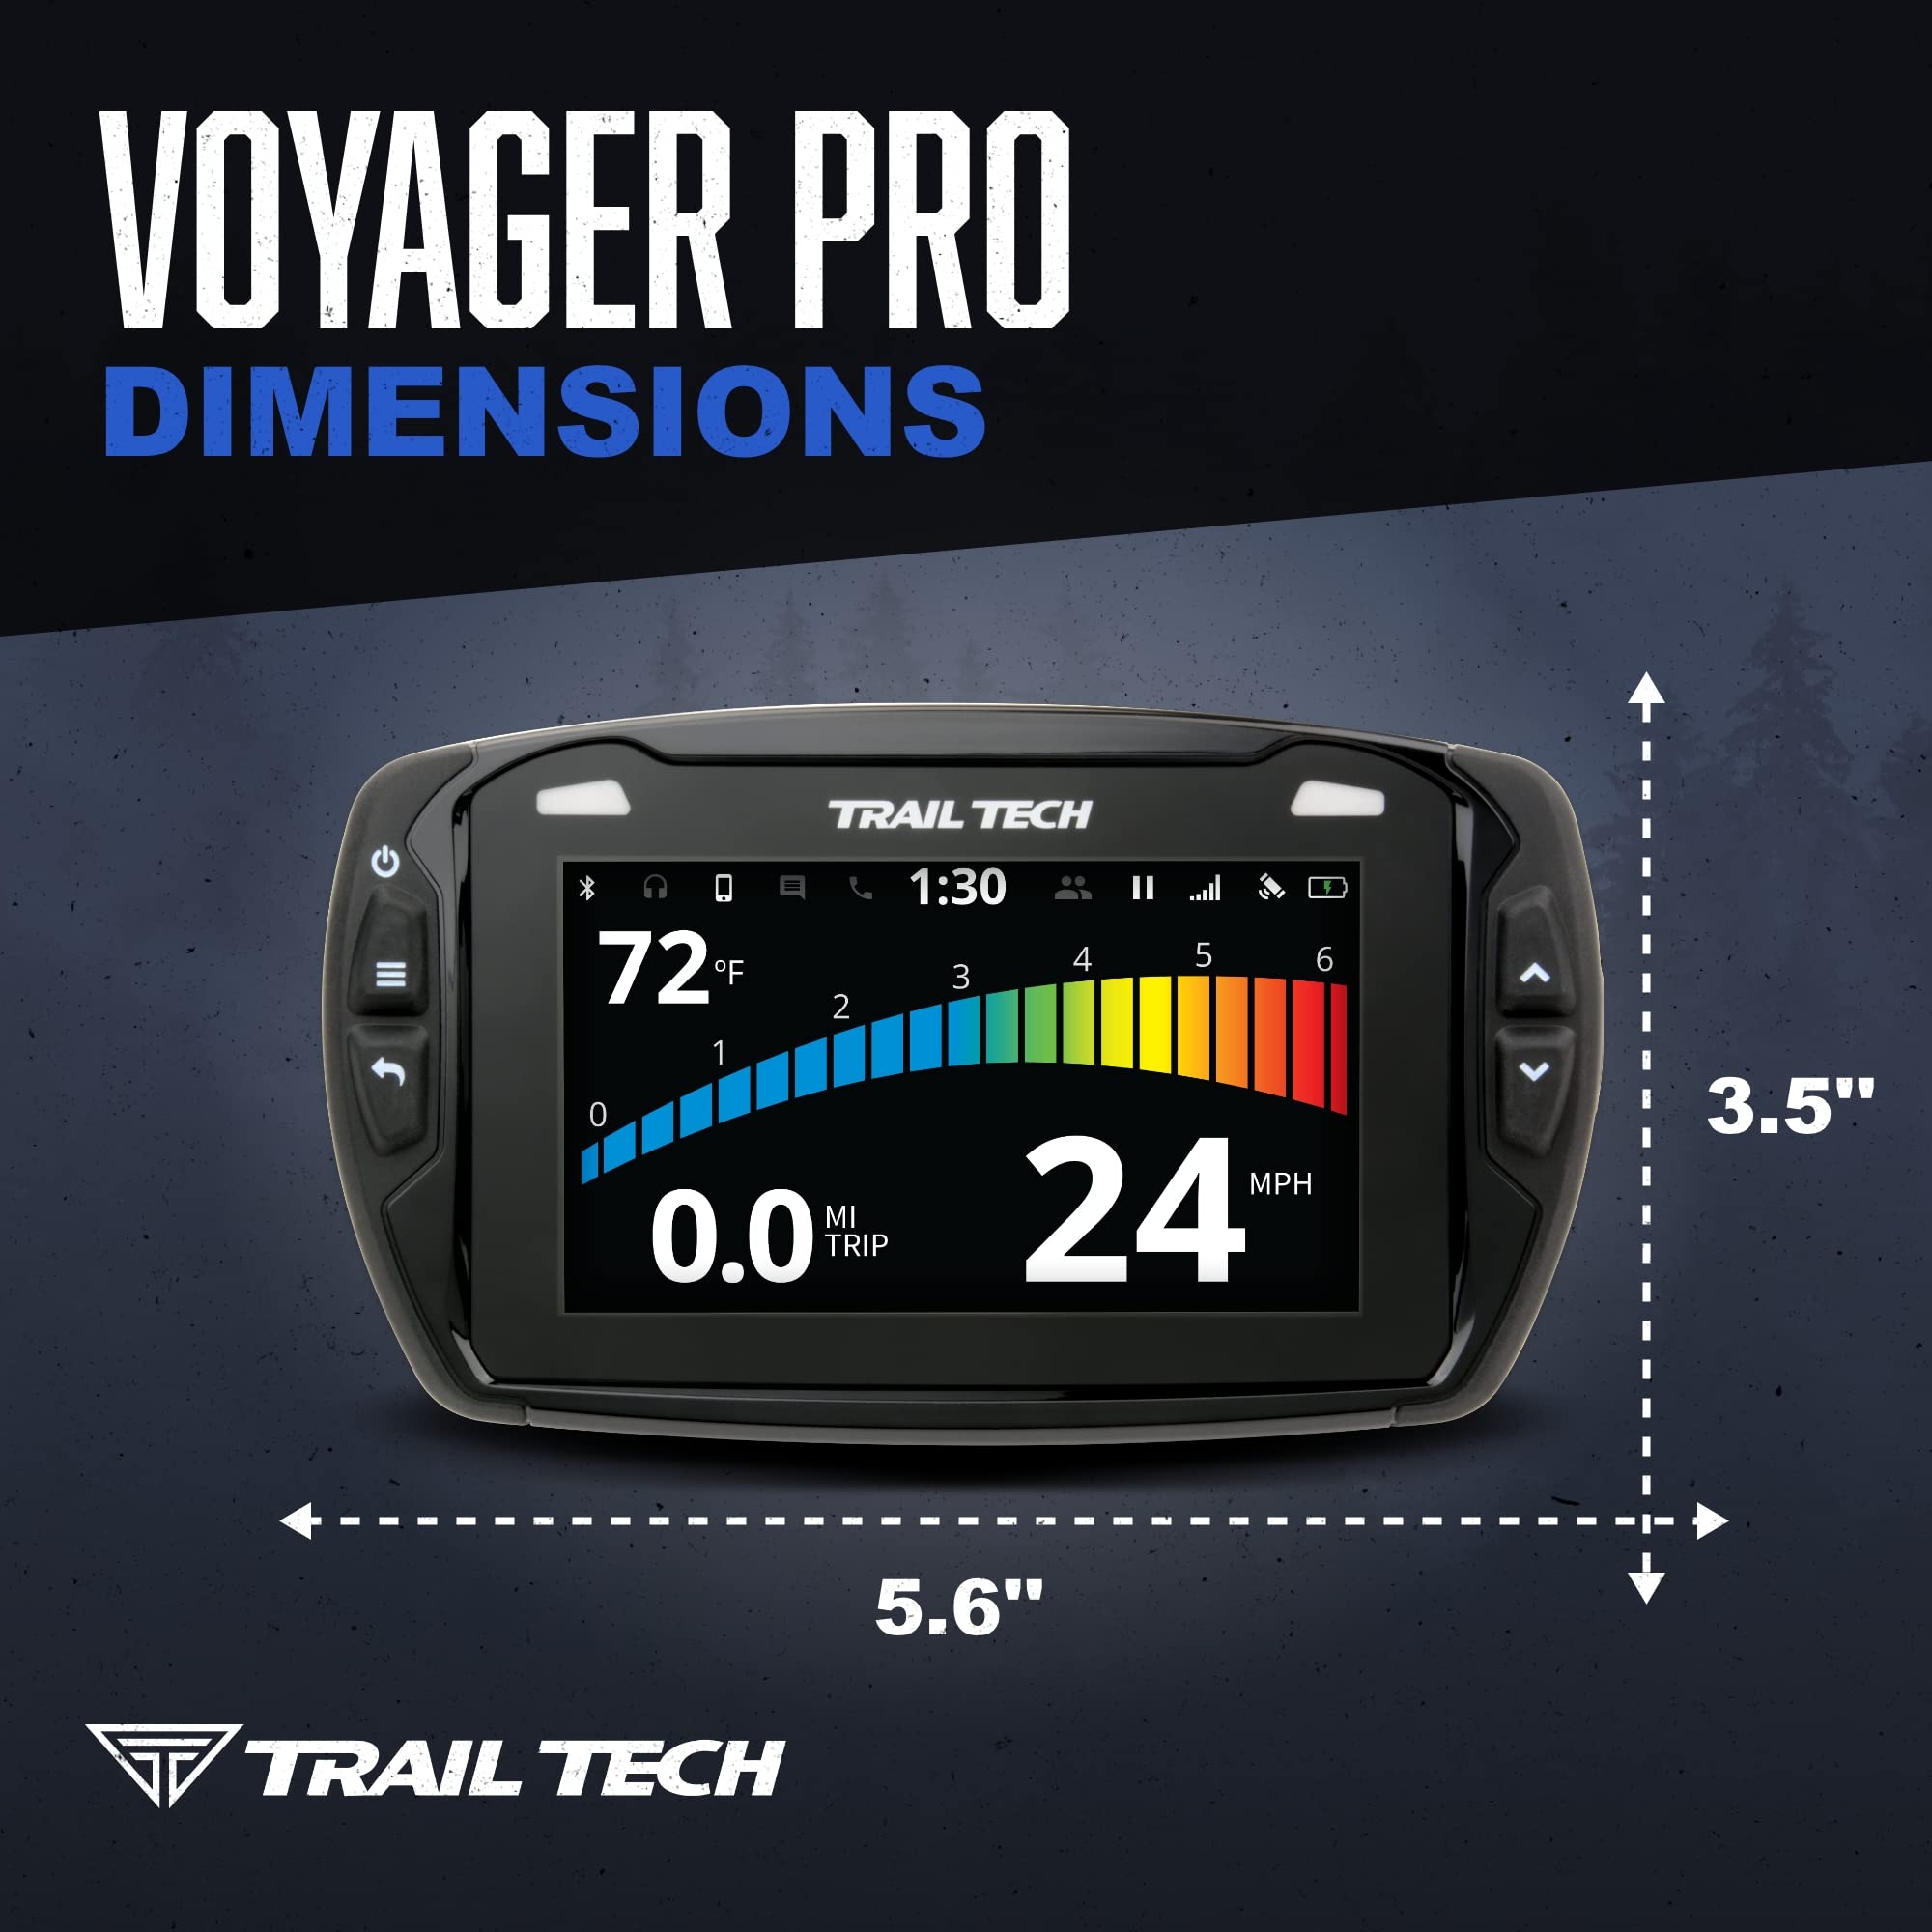 Trail Tech 922-122 Voyager Pro GPS Kit with Digital Gauge Trail Maps 4-Inch TFT LCD Touch Screen, Buddy Tracking, Handsfree Bluetooth